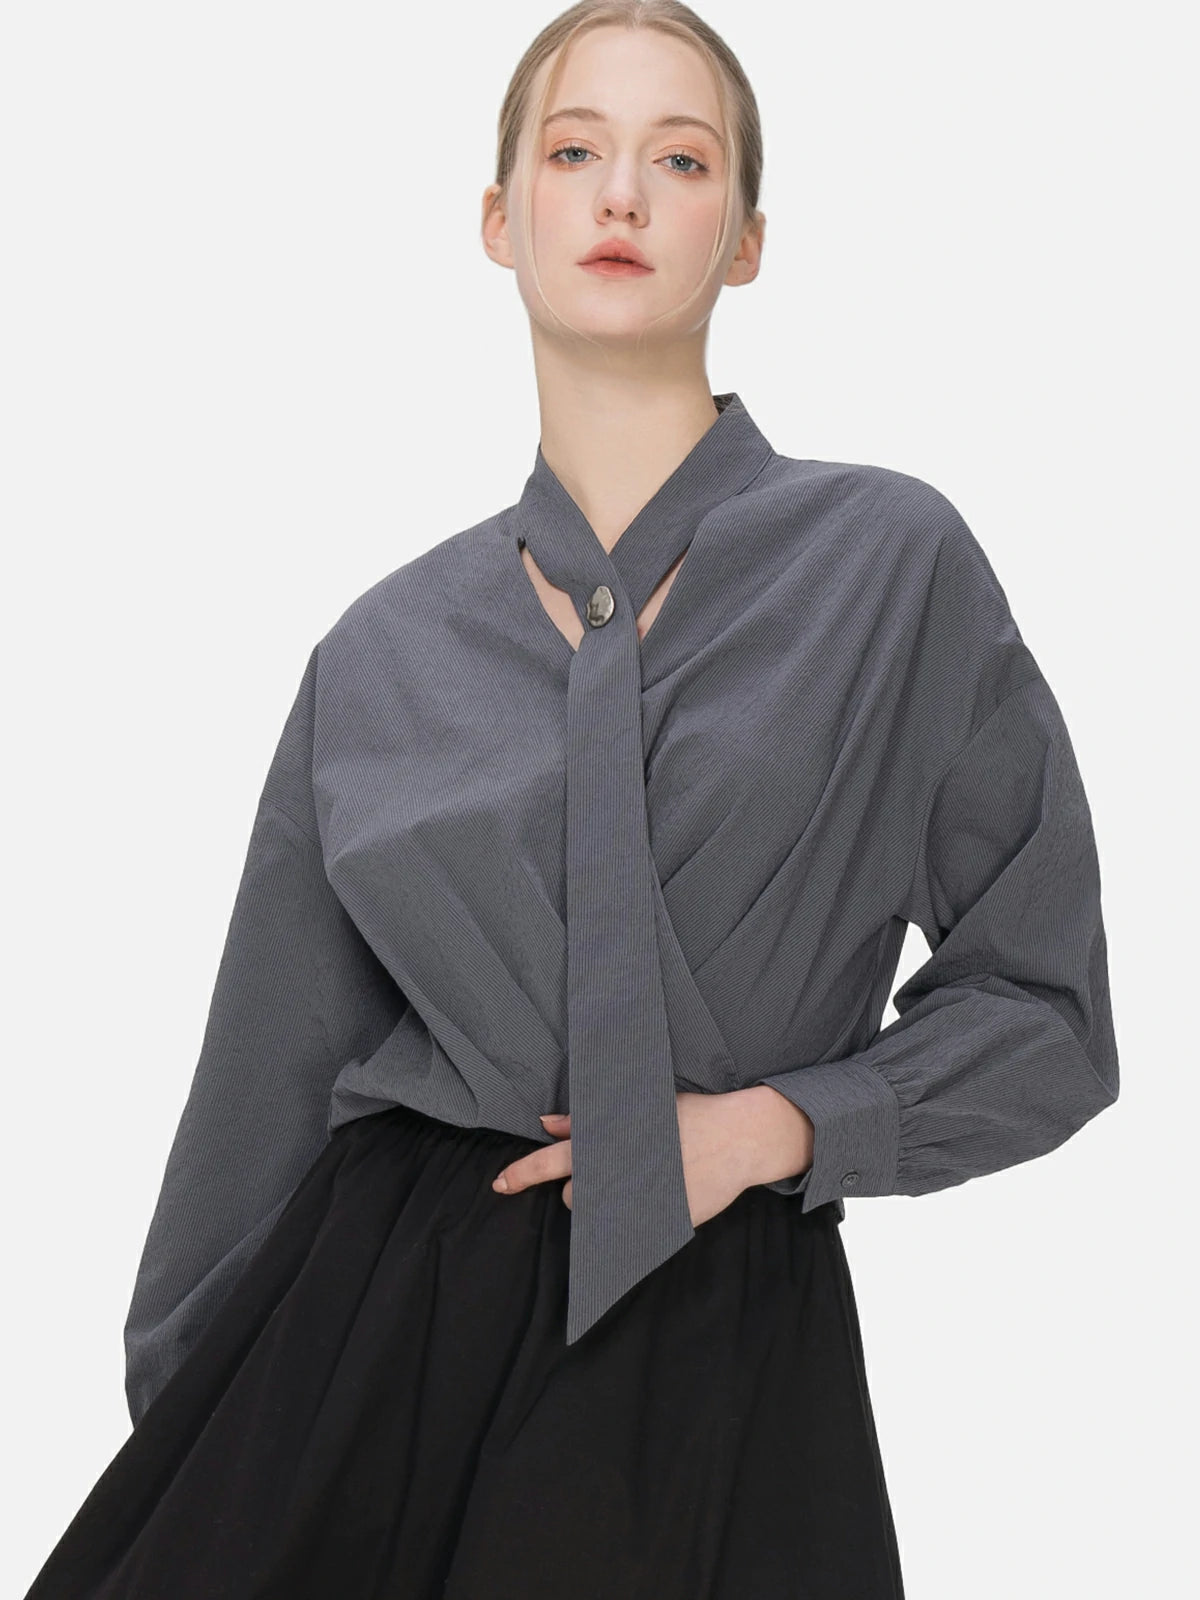 Modern elegance: V-neck blouse showcasing cascading ribbons and a cross-pleat design, creating a uniquely charming and fashionable silhouette.